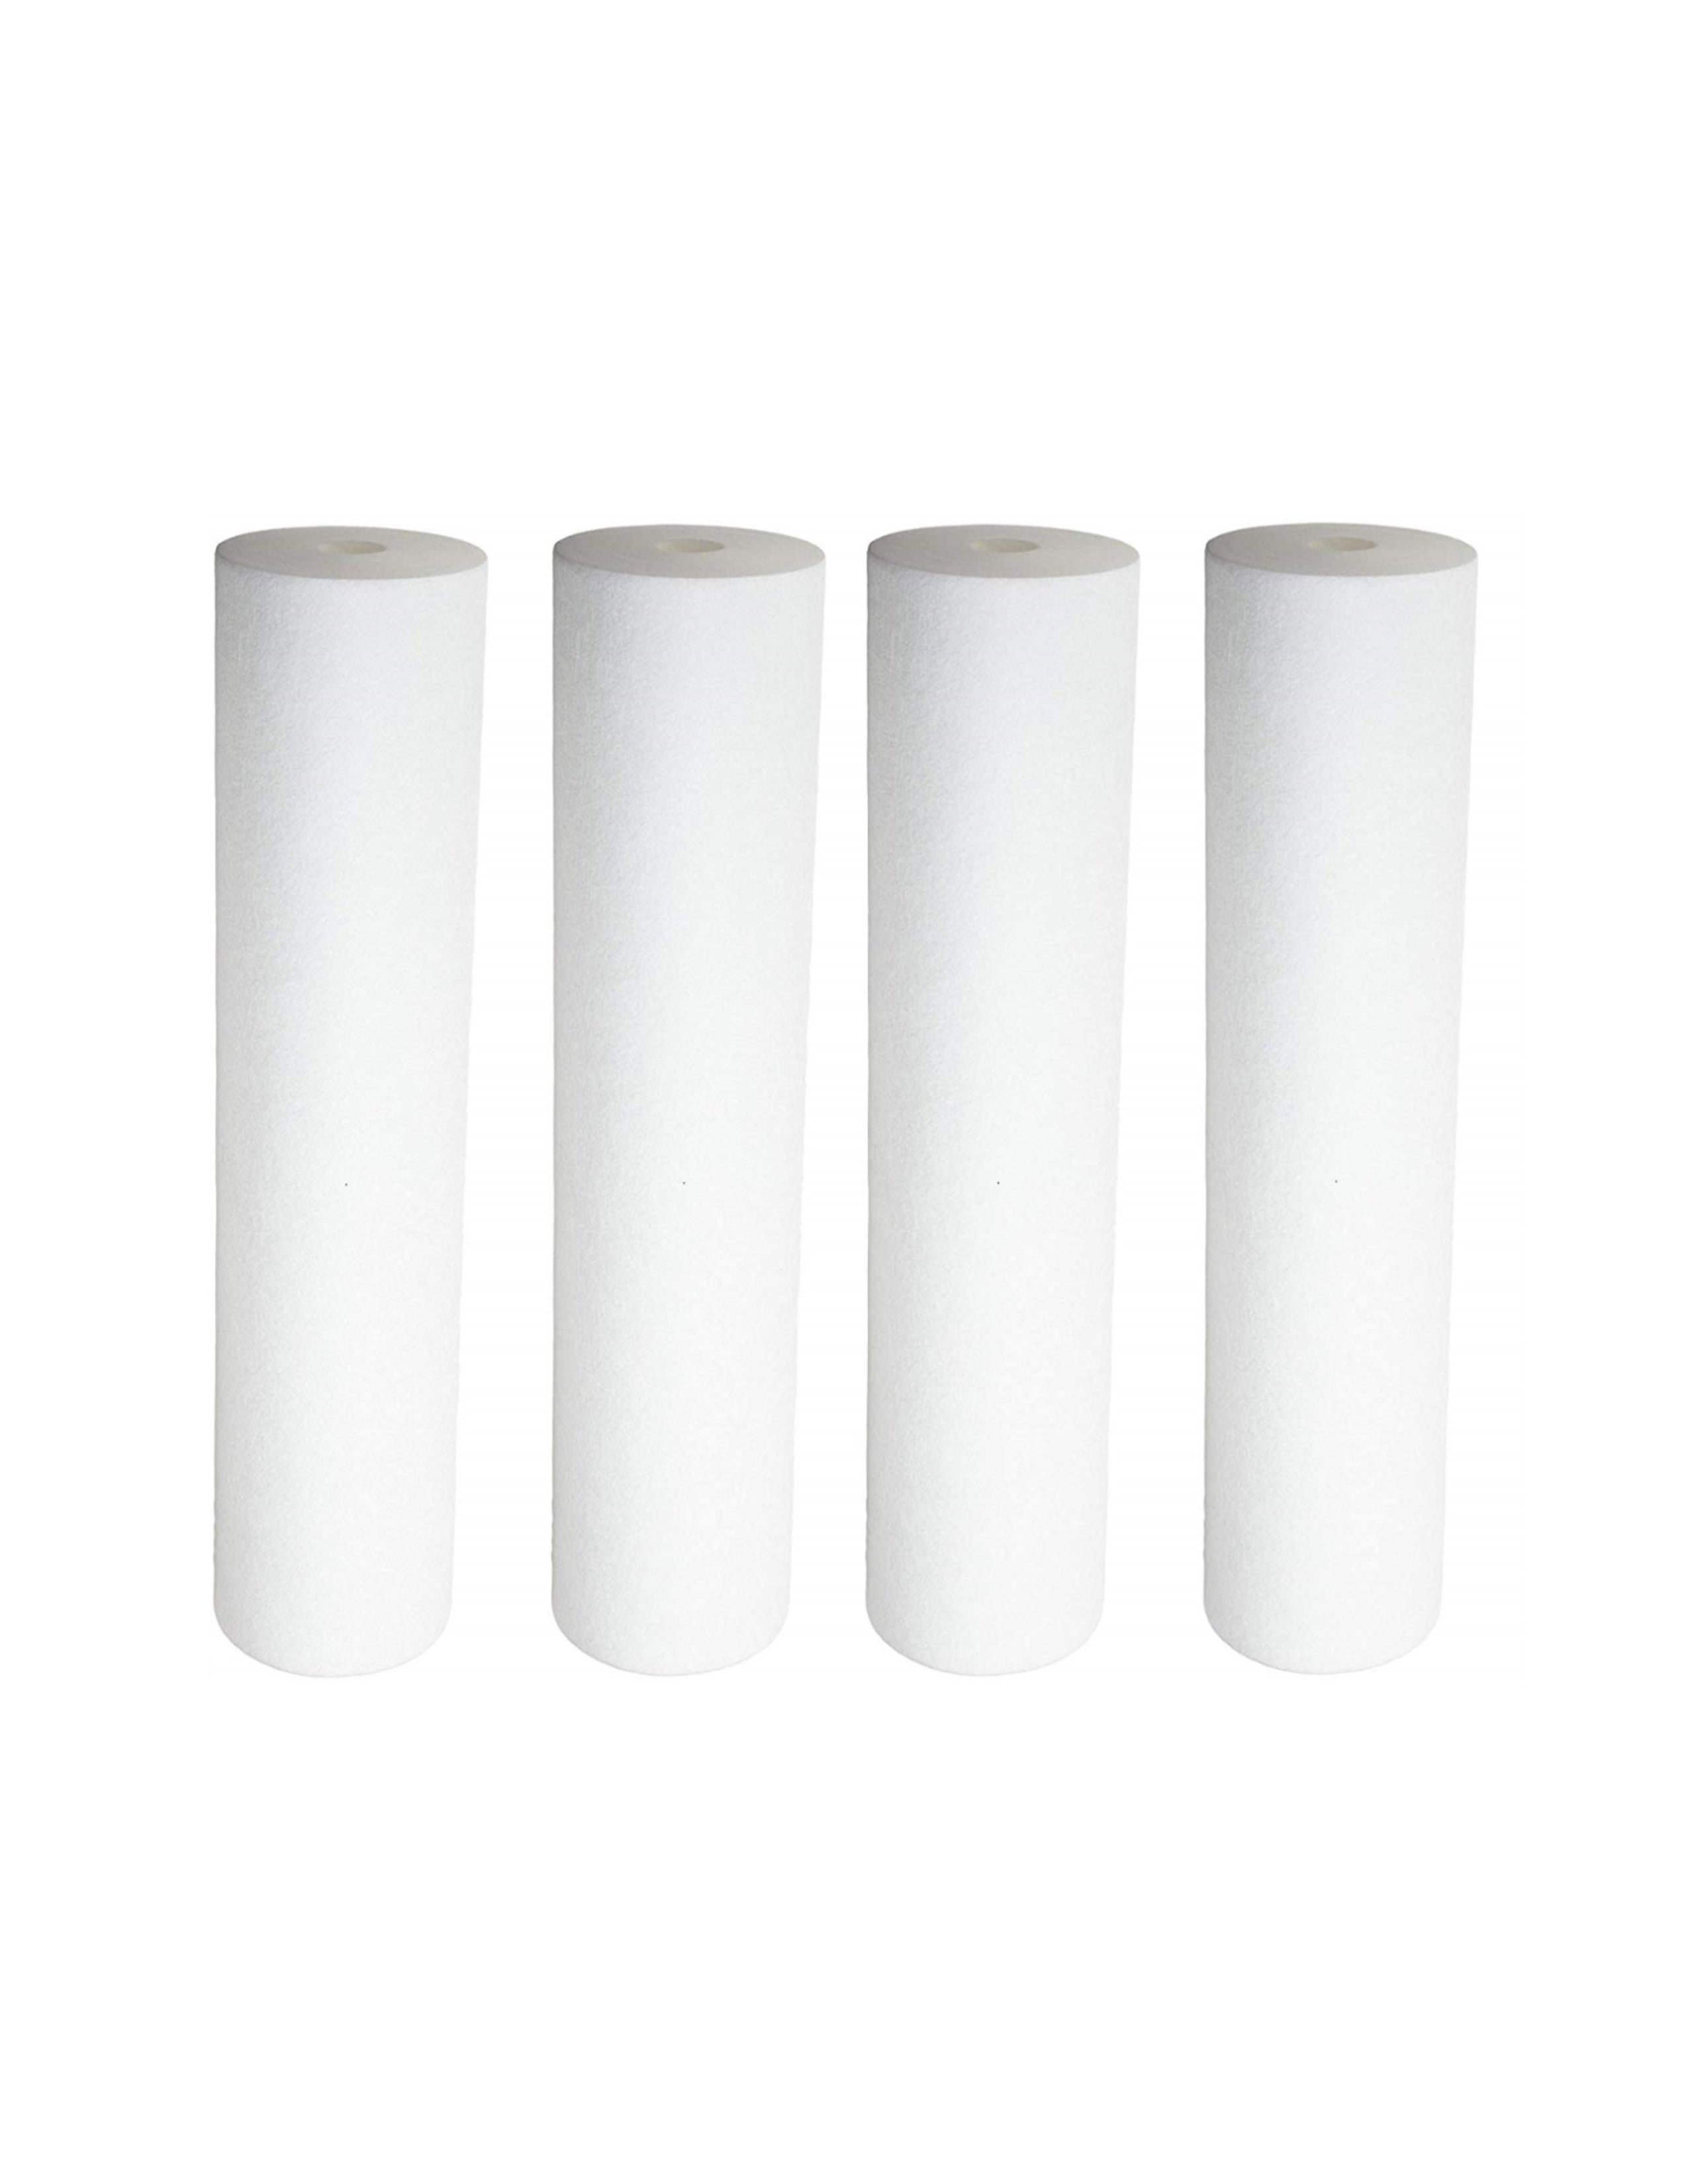 Fits Pentek PS1-10C 1 Micron 10 x 2.5 Comparable Sediment Water Filter 4 Pack 